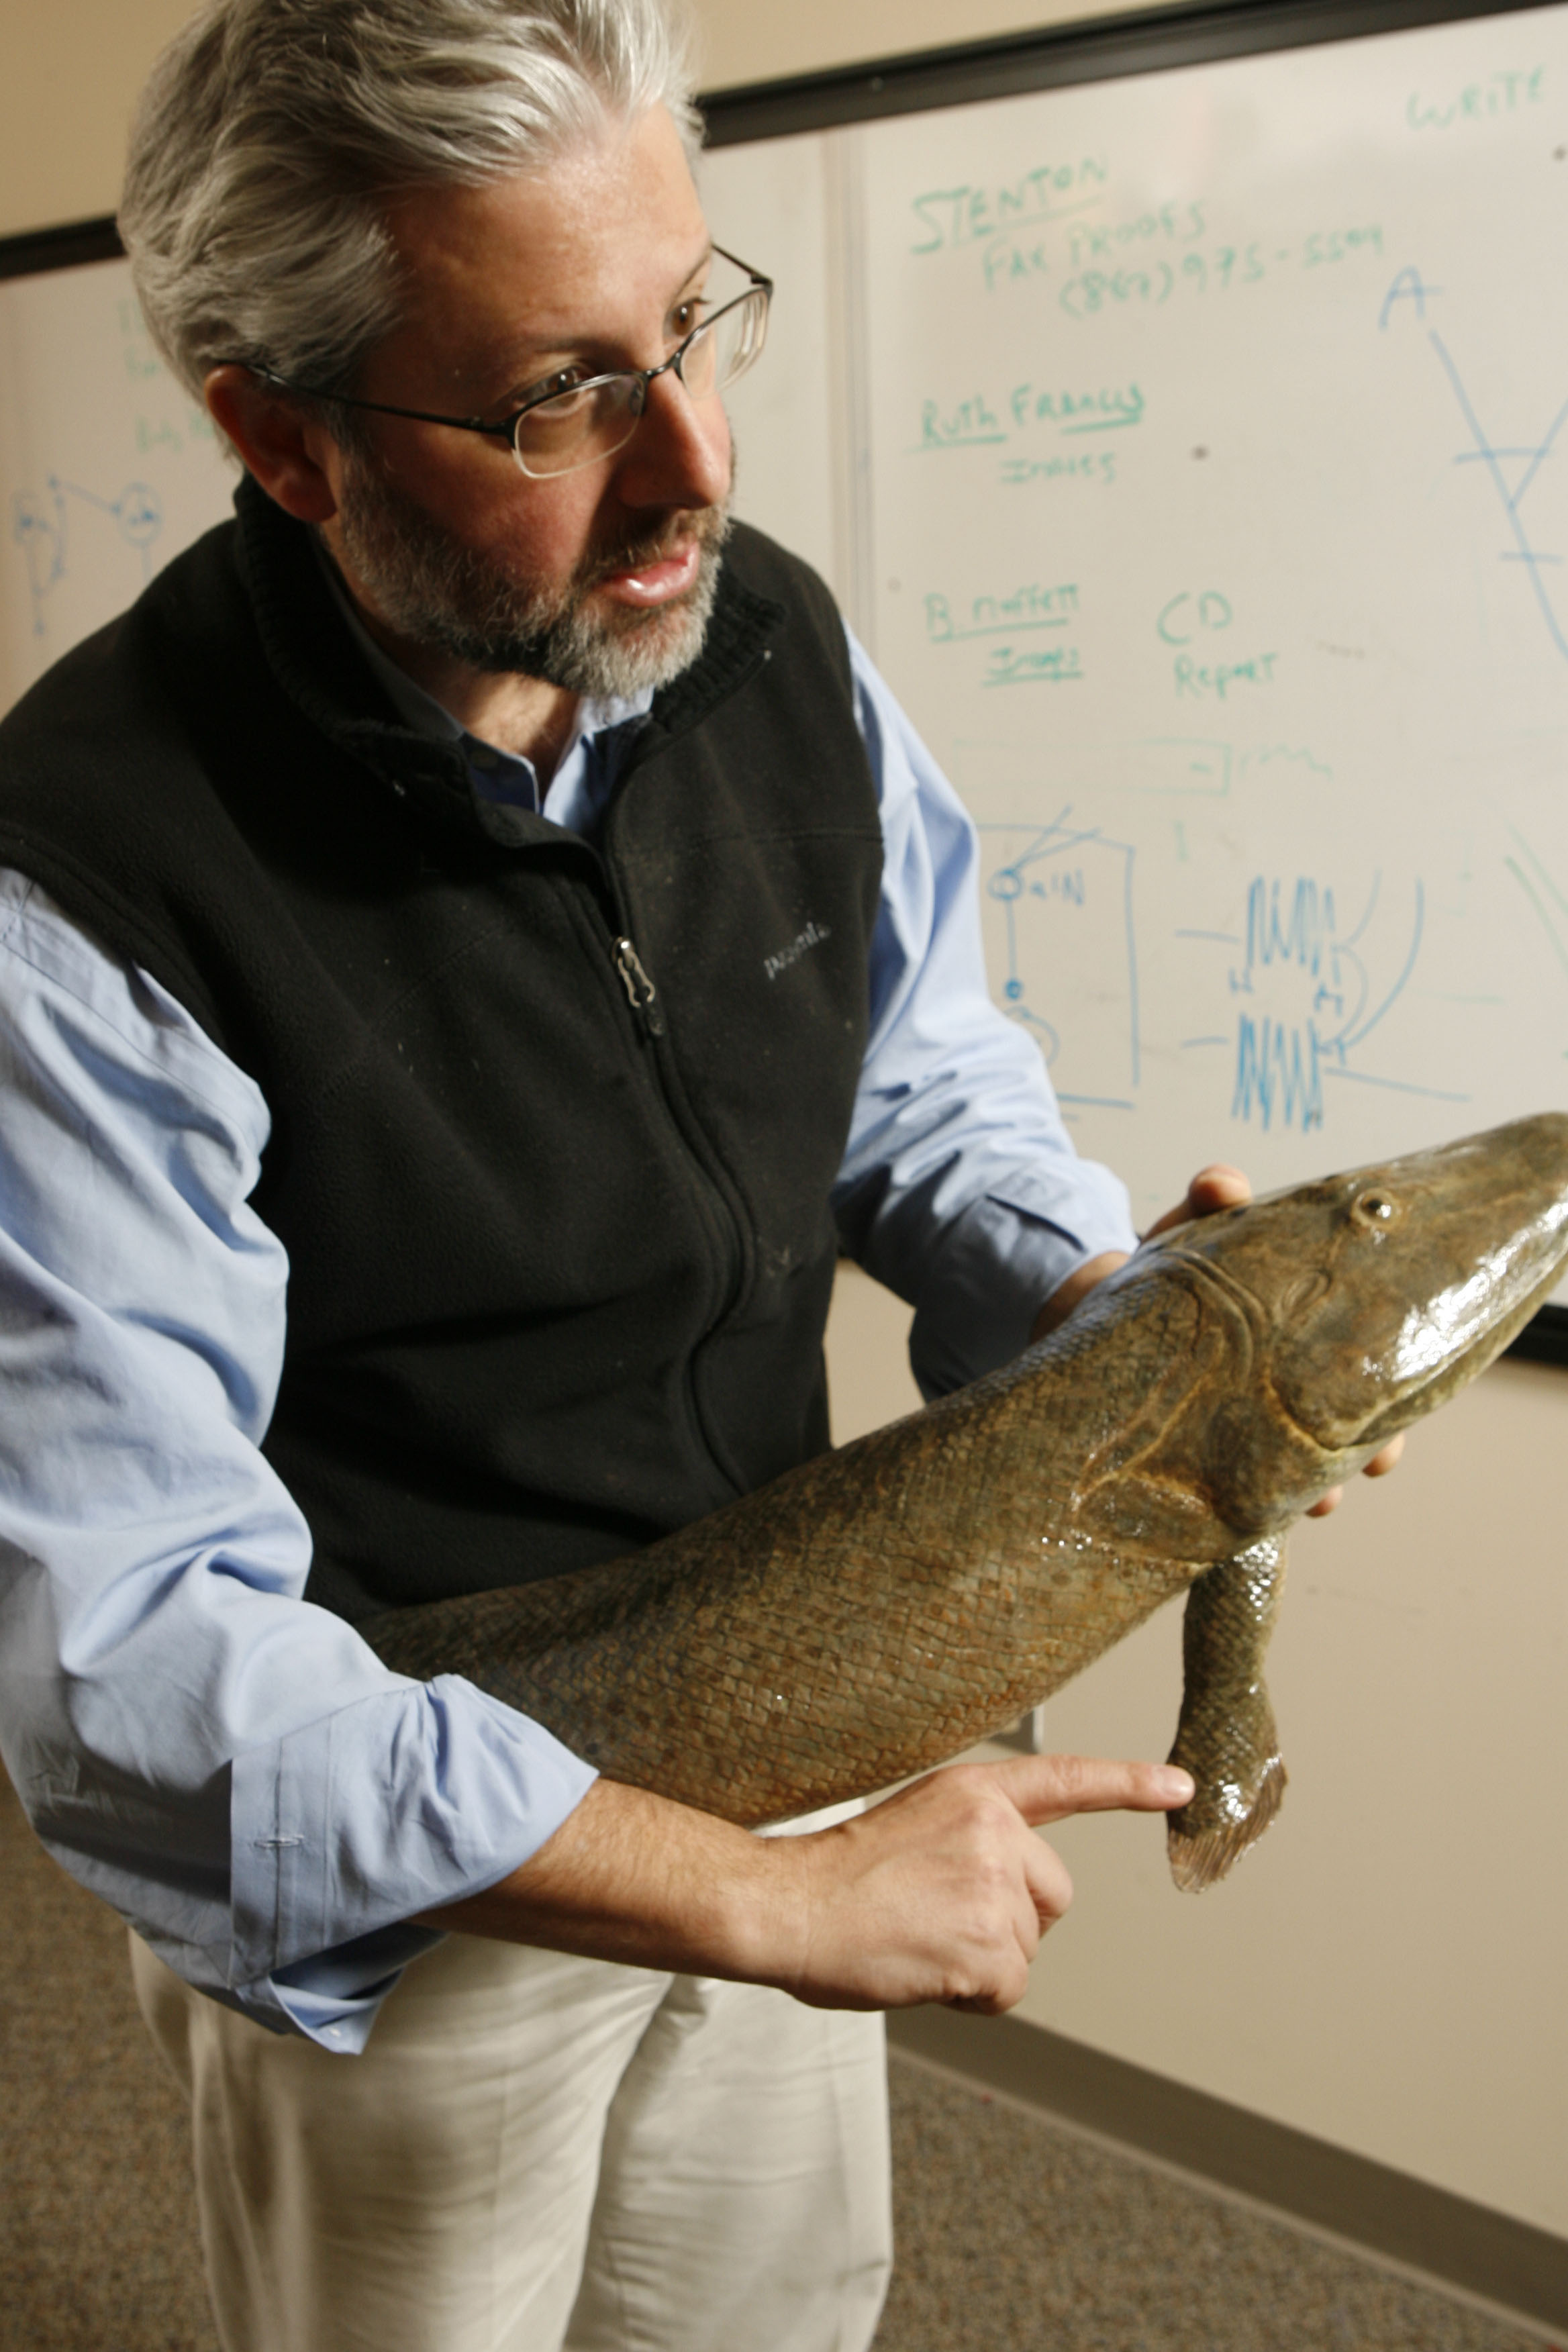 Part of the family: Shubin and a model of the Tiktaalik—ancestor to us all (Chicago Tribune; MCT via Getty Images)